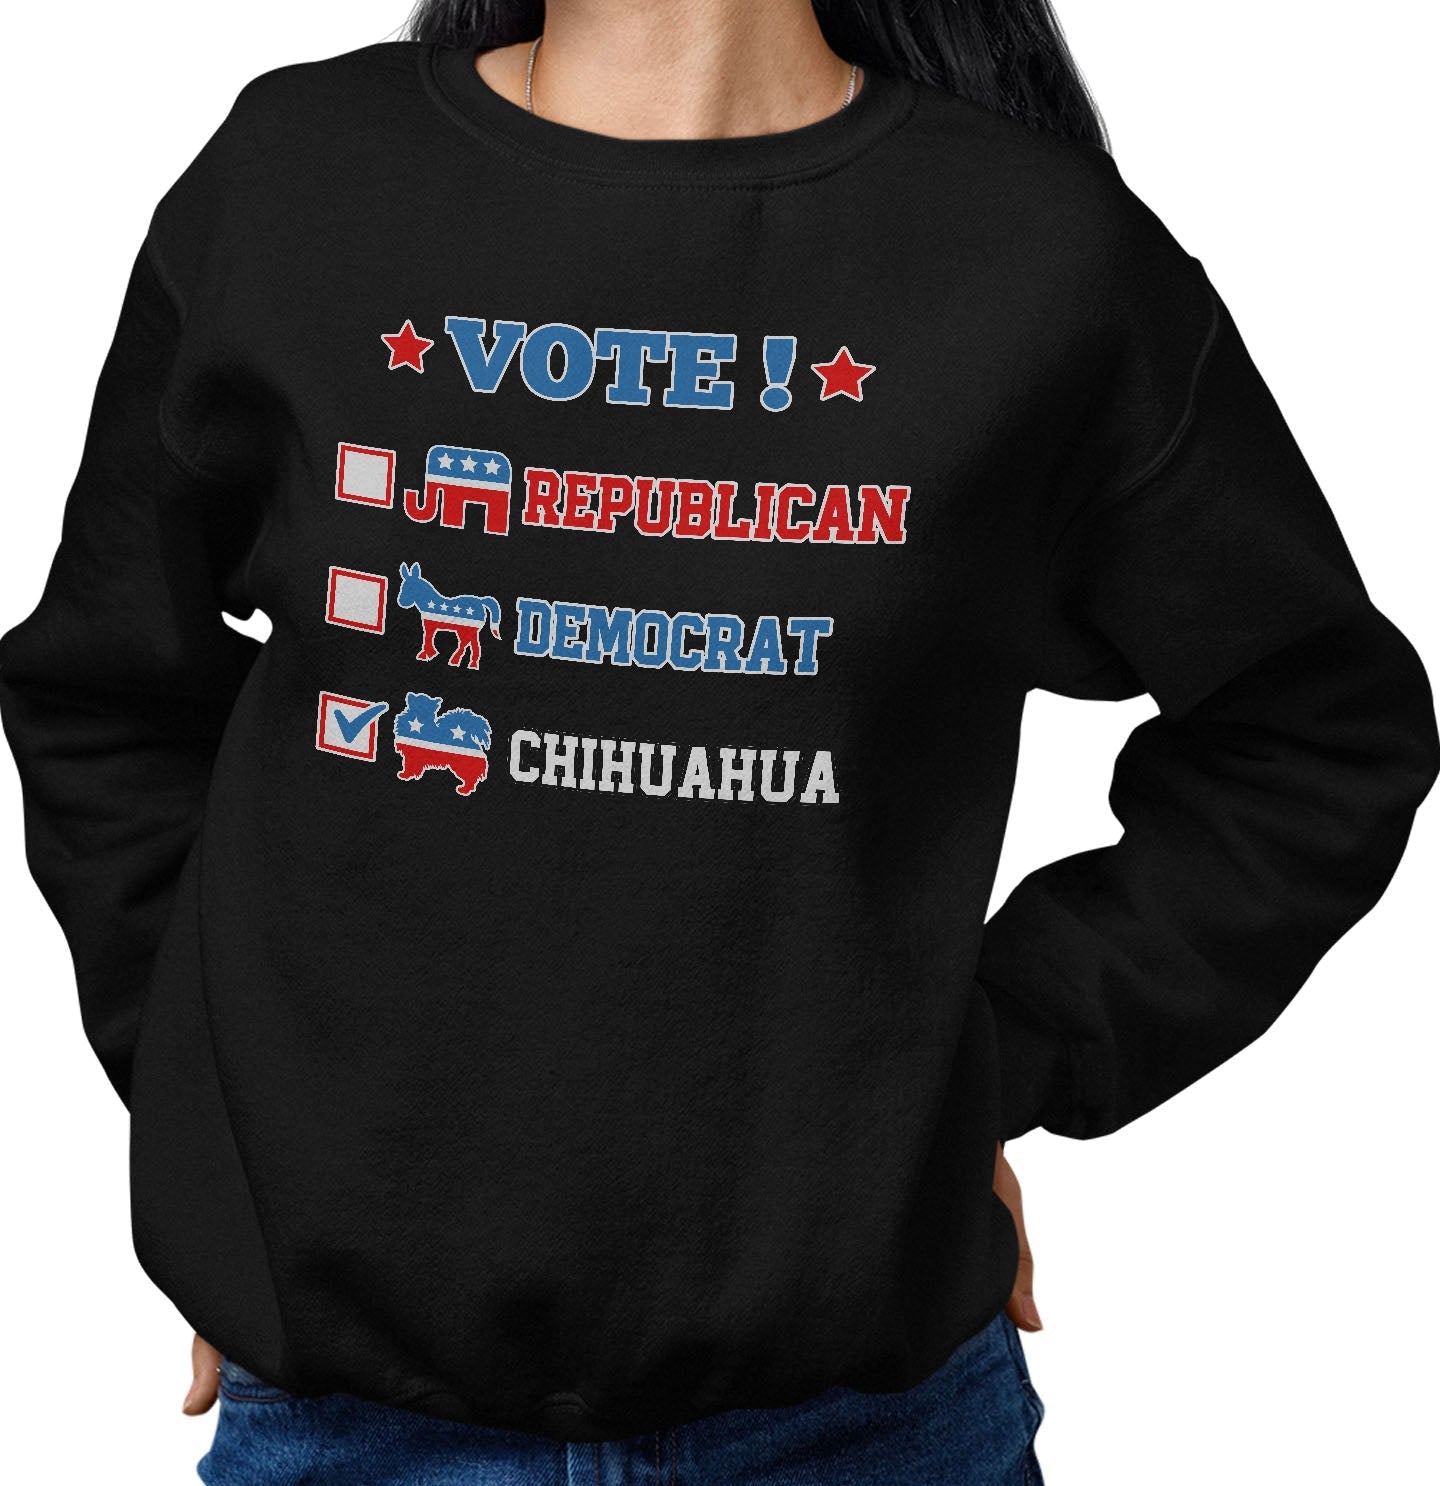 Vote for the Chihuahua (Long-Haired) - Adult Unisex Crewneck Sweatshirt